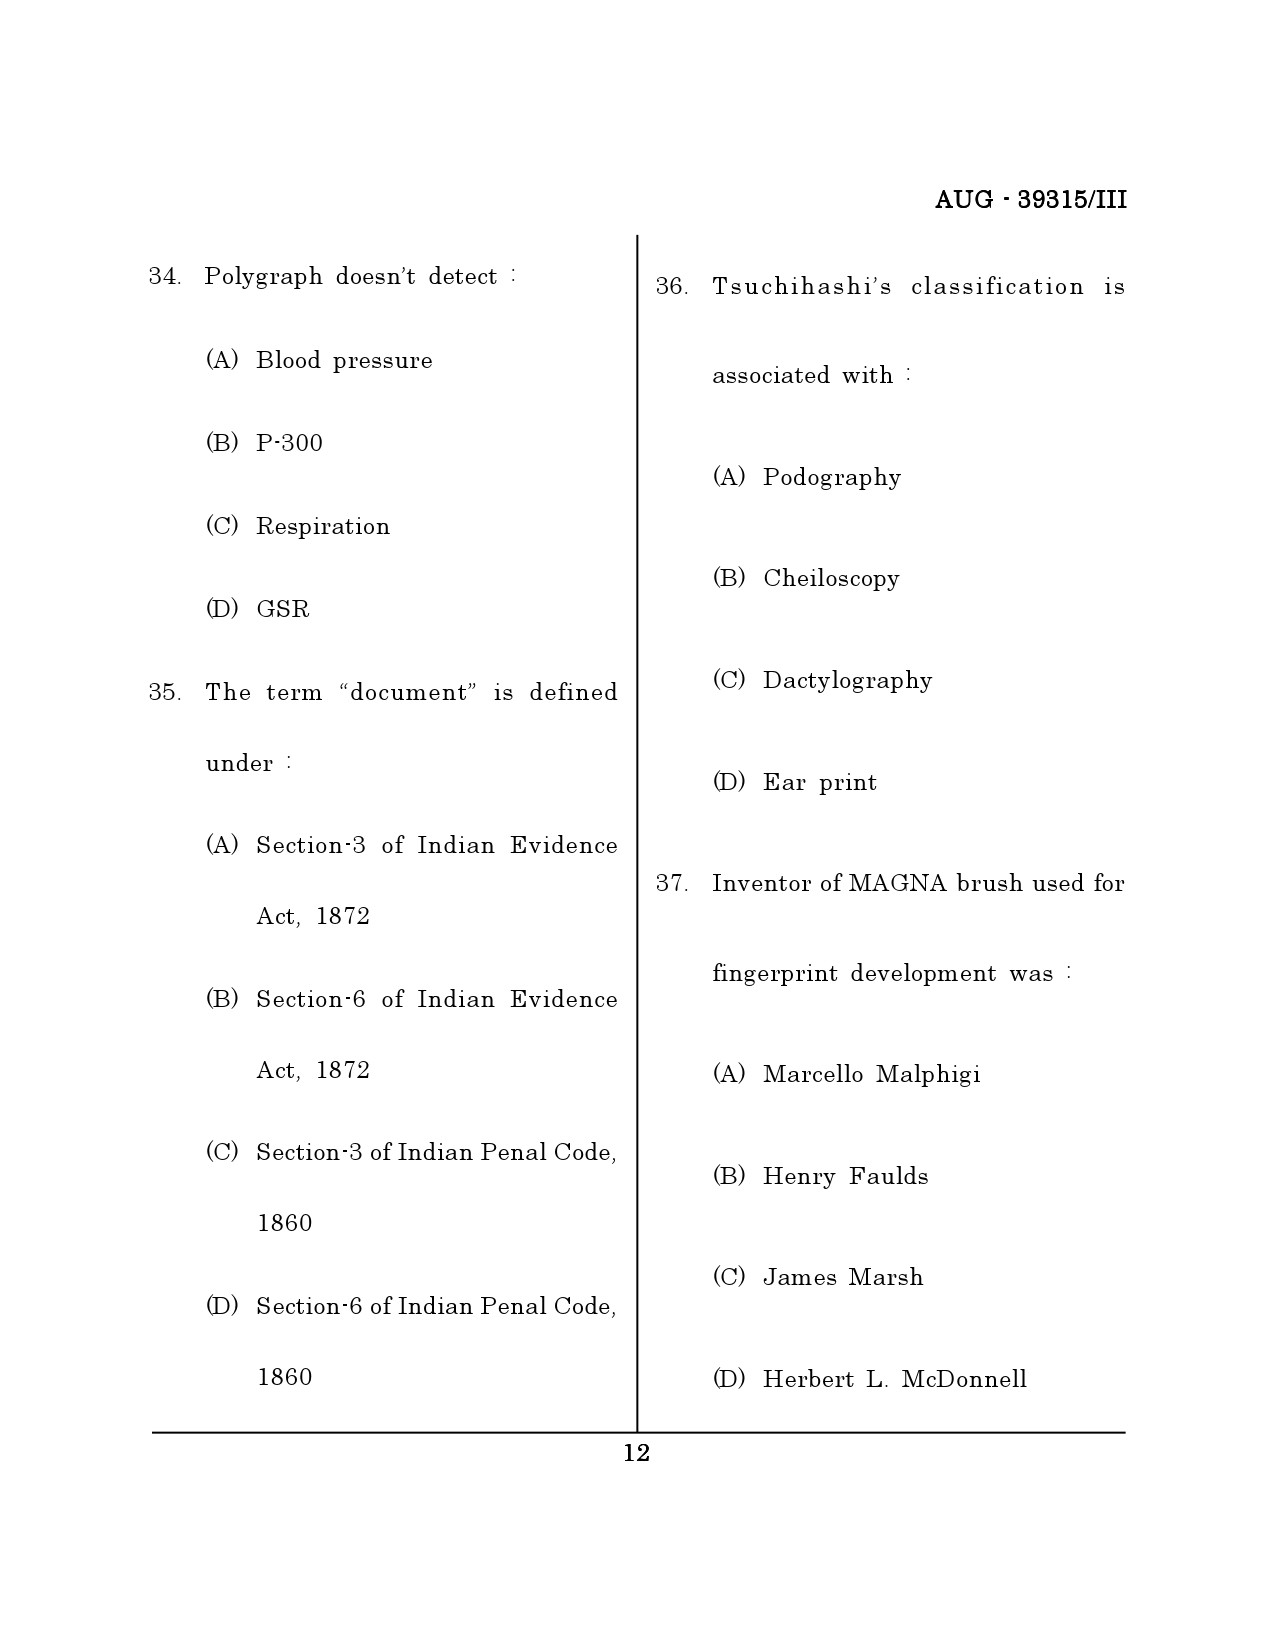 Maharashtra SET Forensic Science Question Paper III August 2015 11